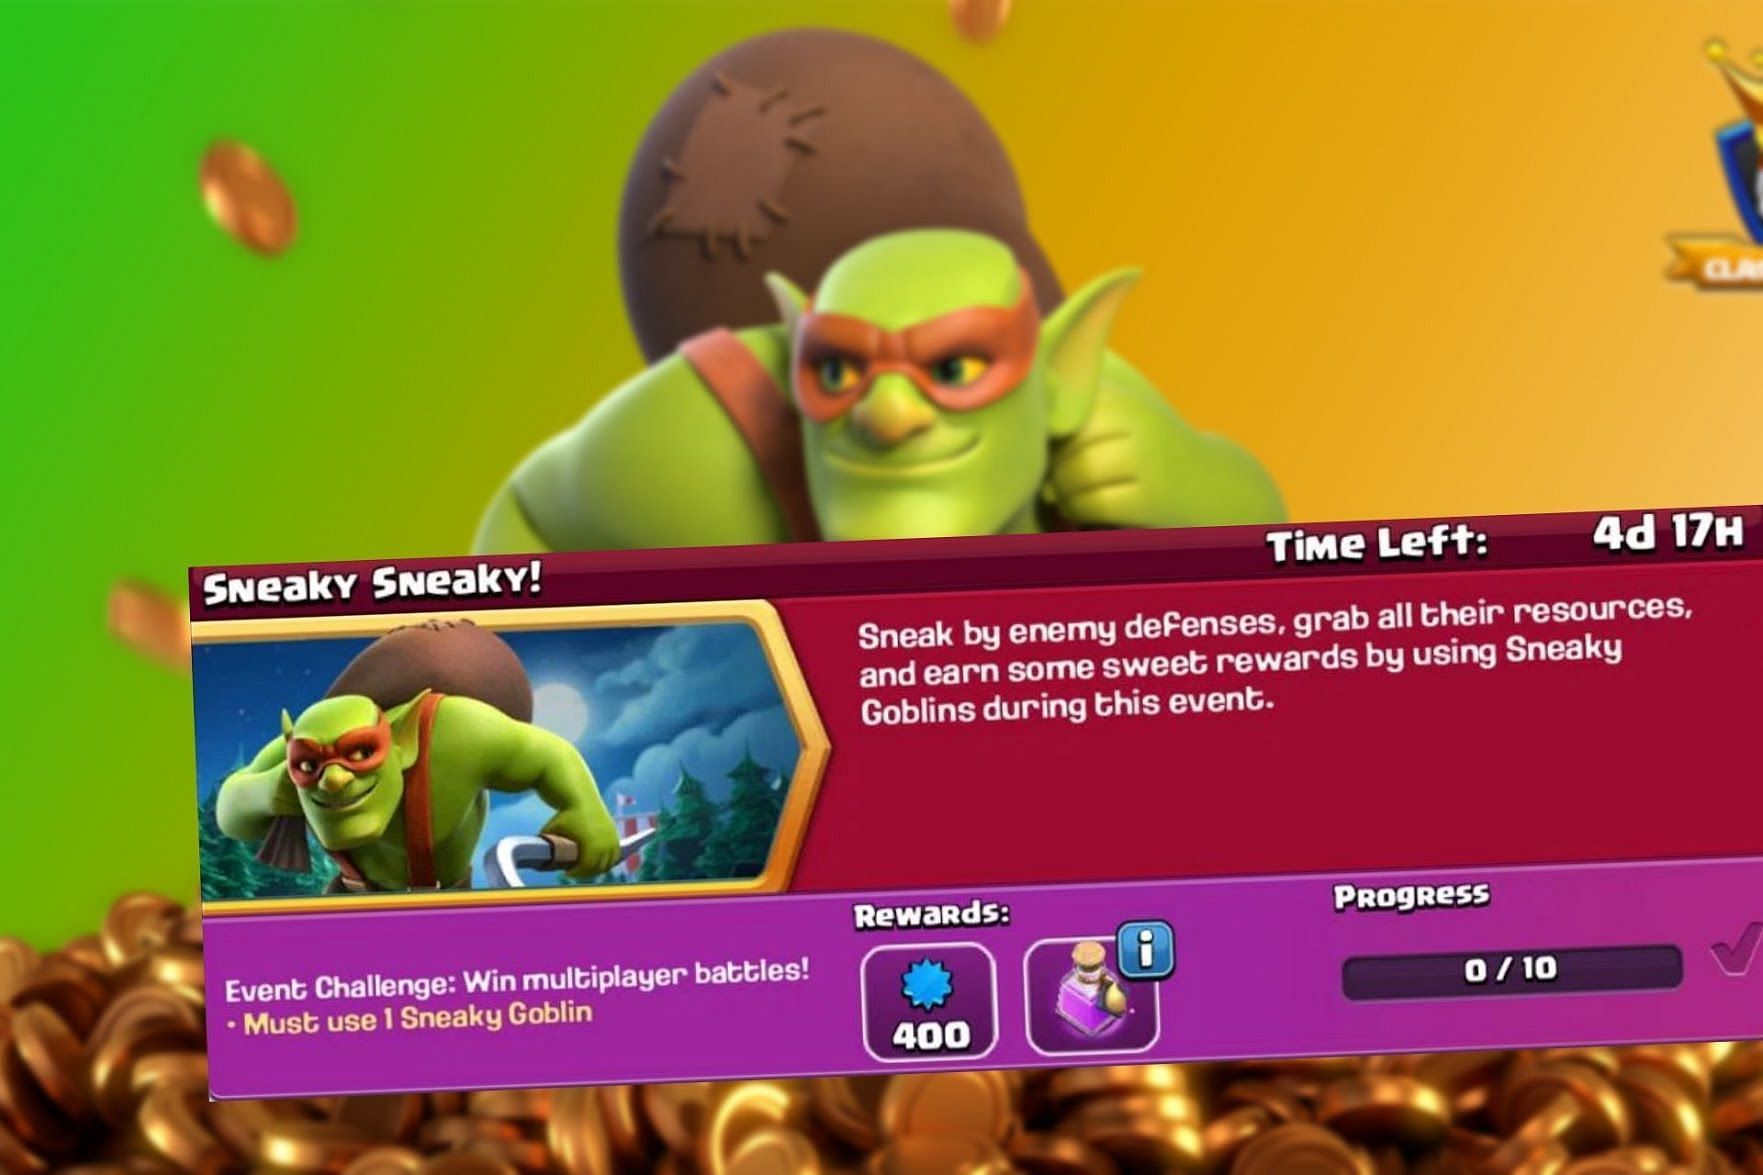 Clash of Clans: How to beat the Goblin King Challenge